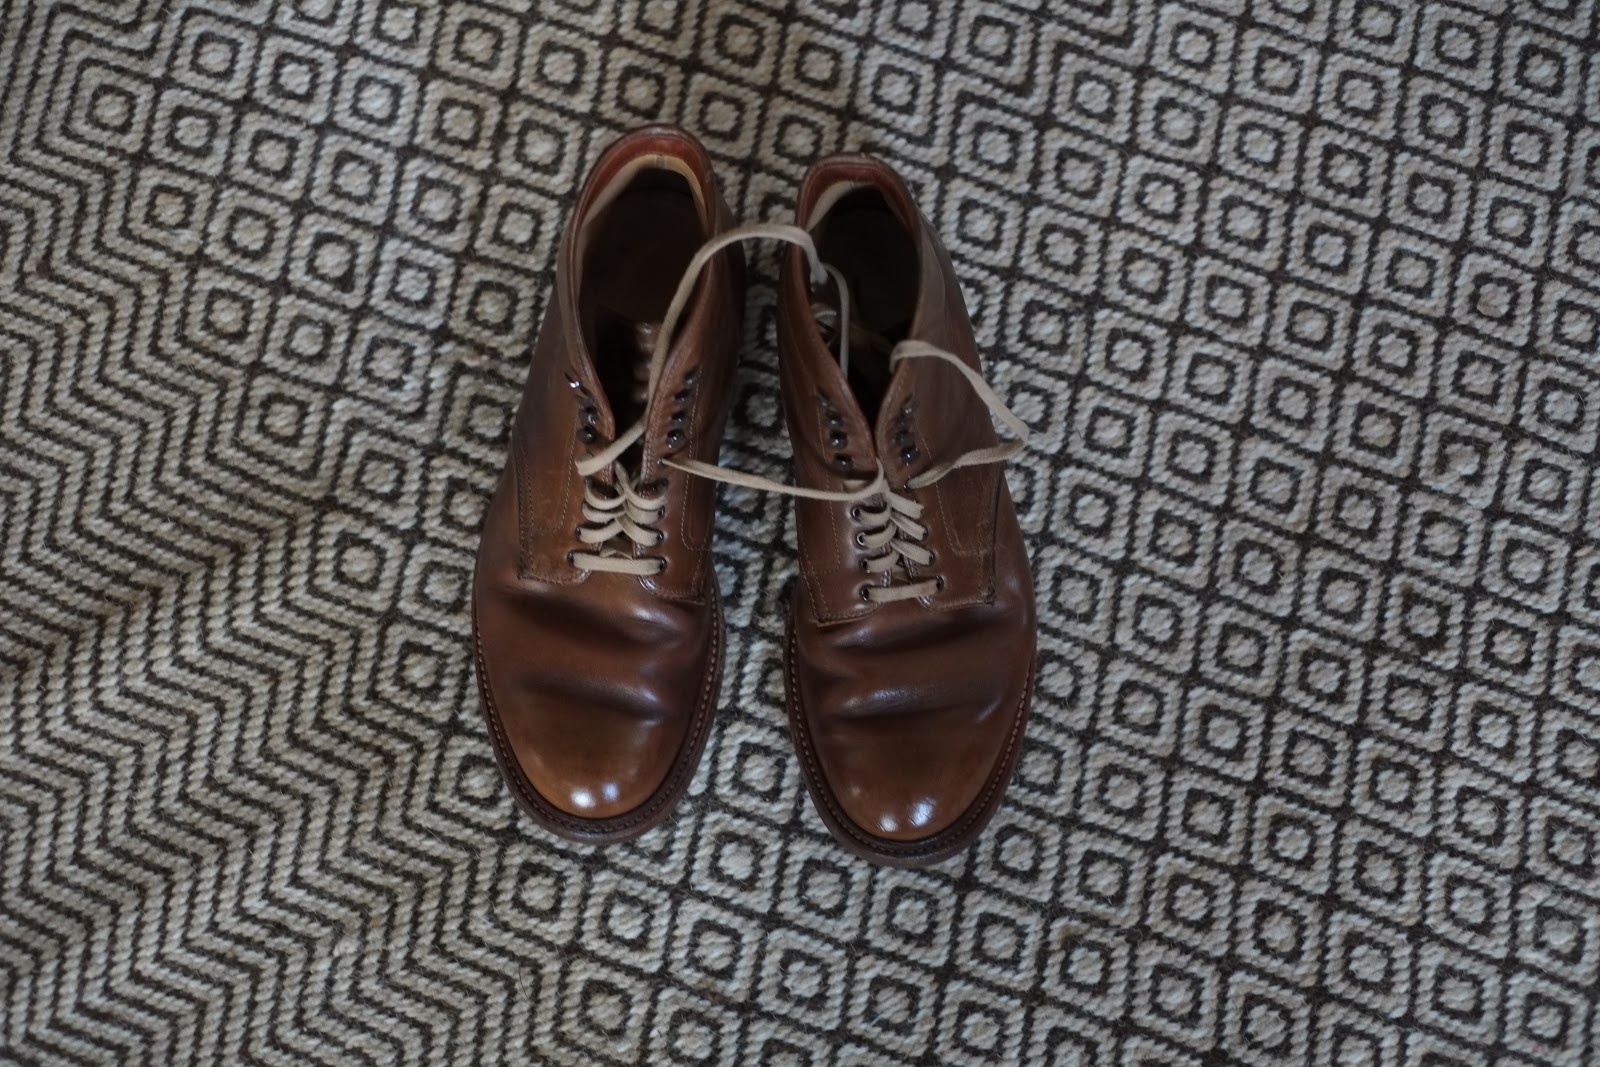 Rancourt Natural CXL Beefroll Loafer review : r/malefashionadvice